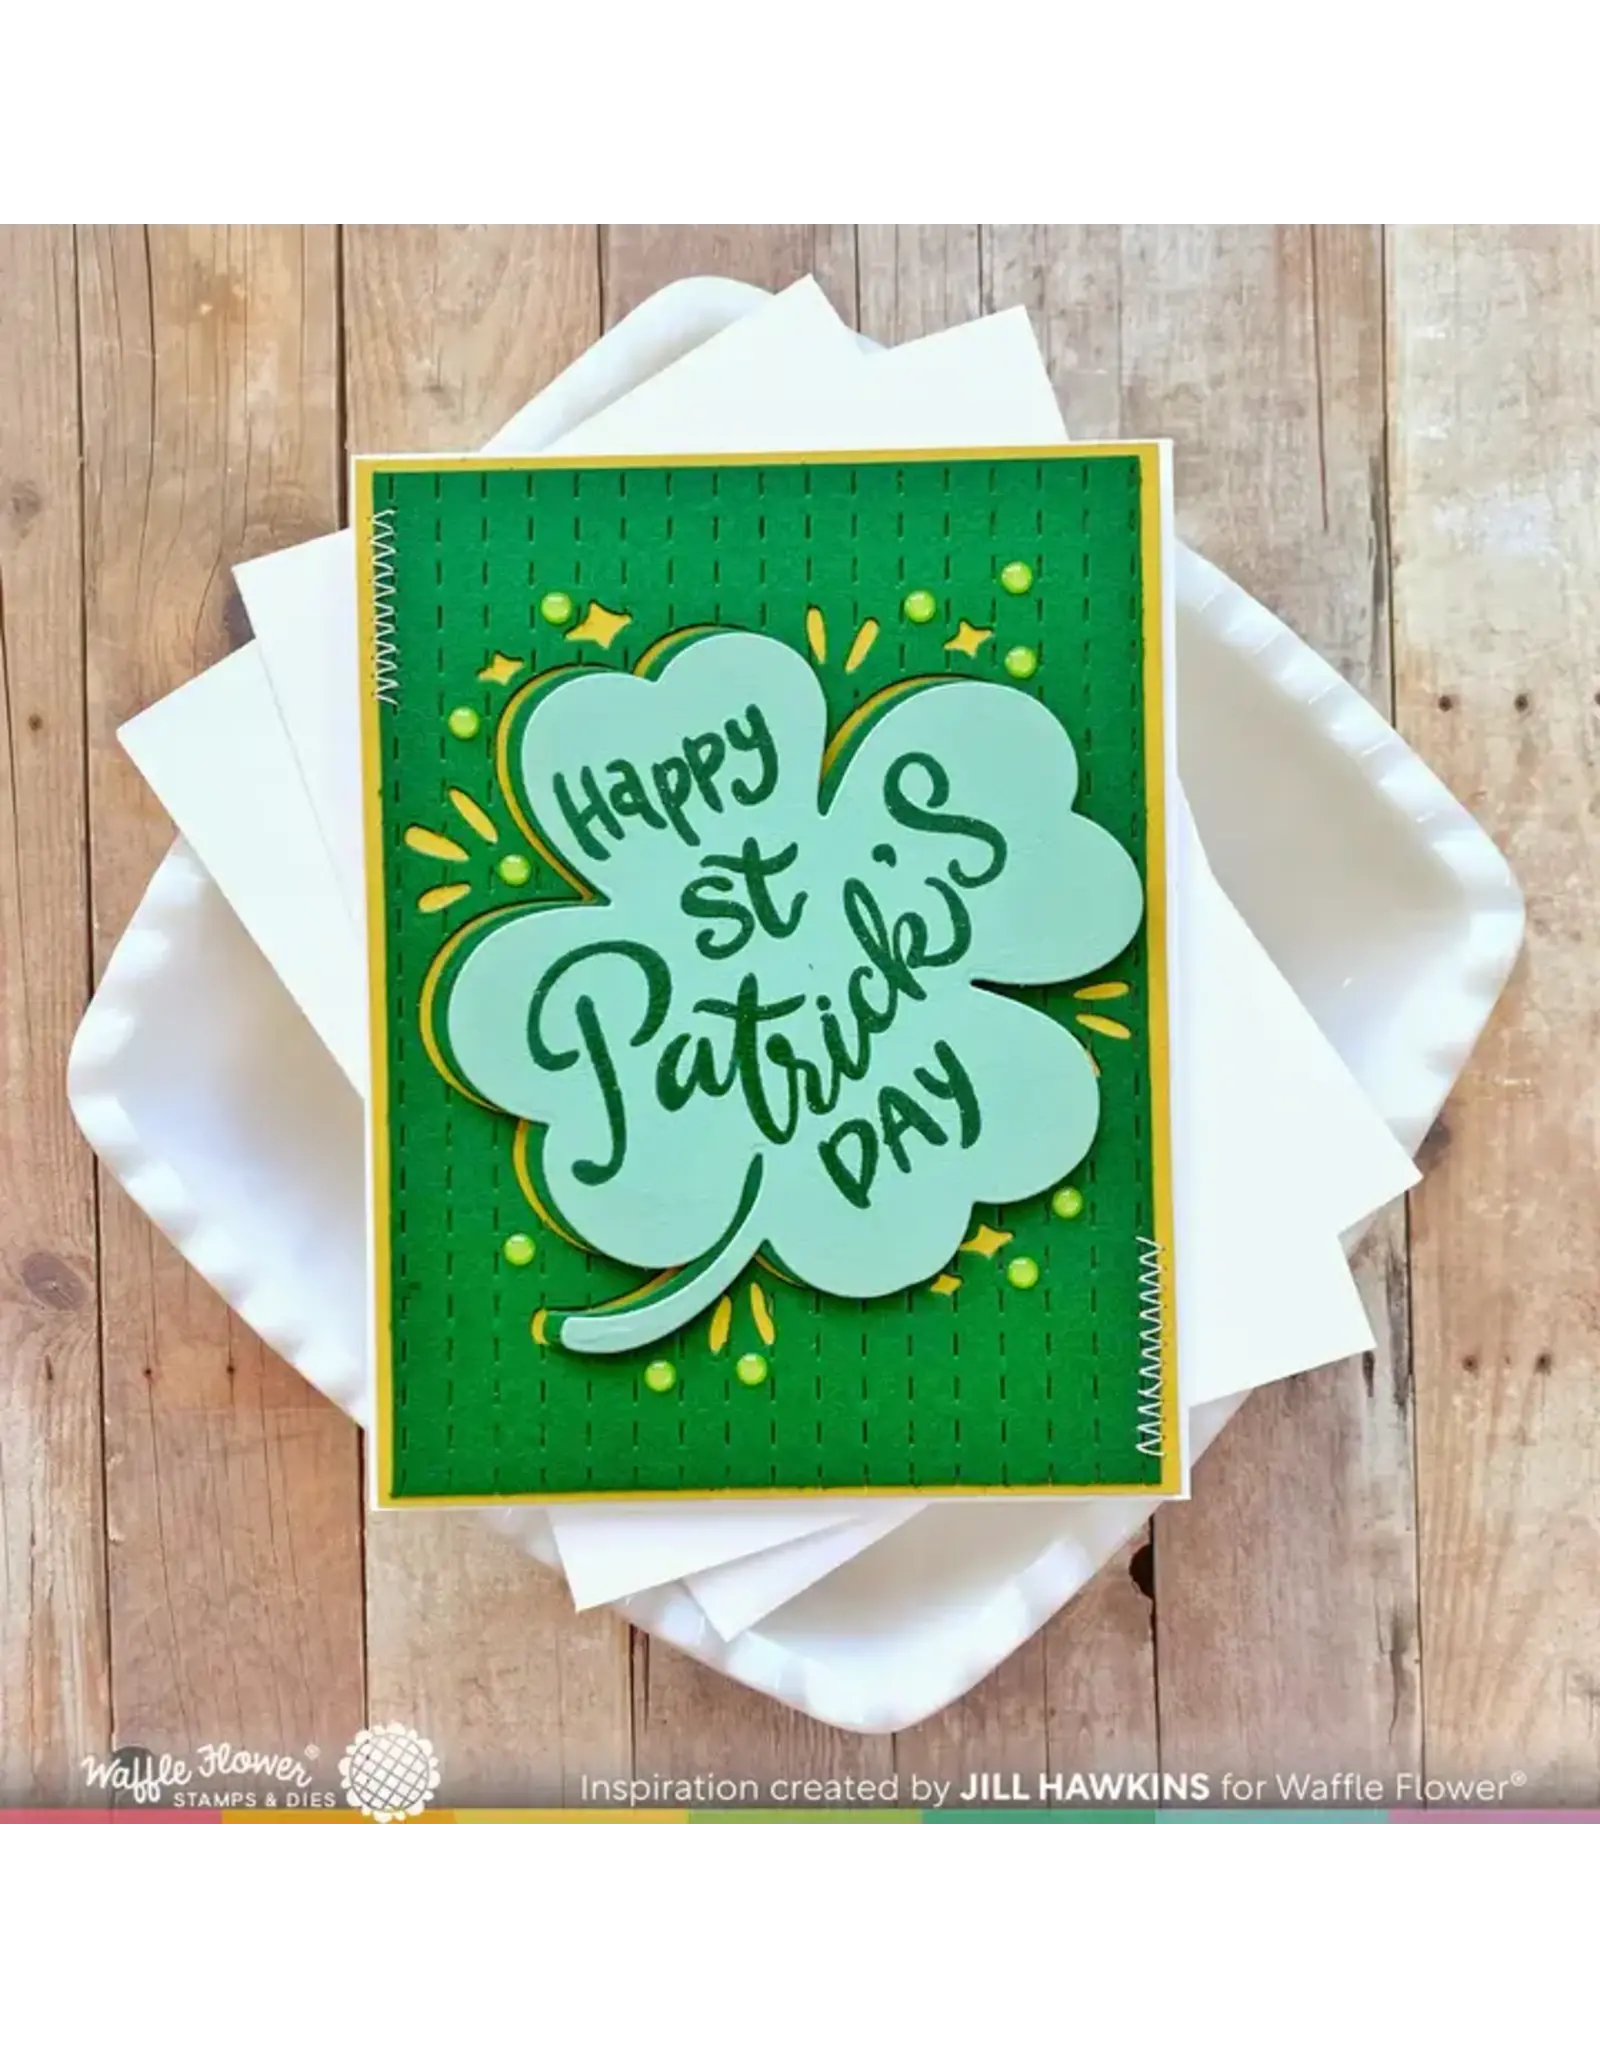 WAFFLE FLOWER WAFFLE FLOWER HAPPY ST. PATRICK'S DAY CLEAR STAMP SET